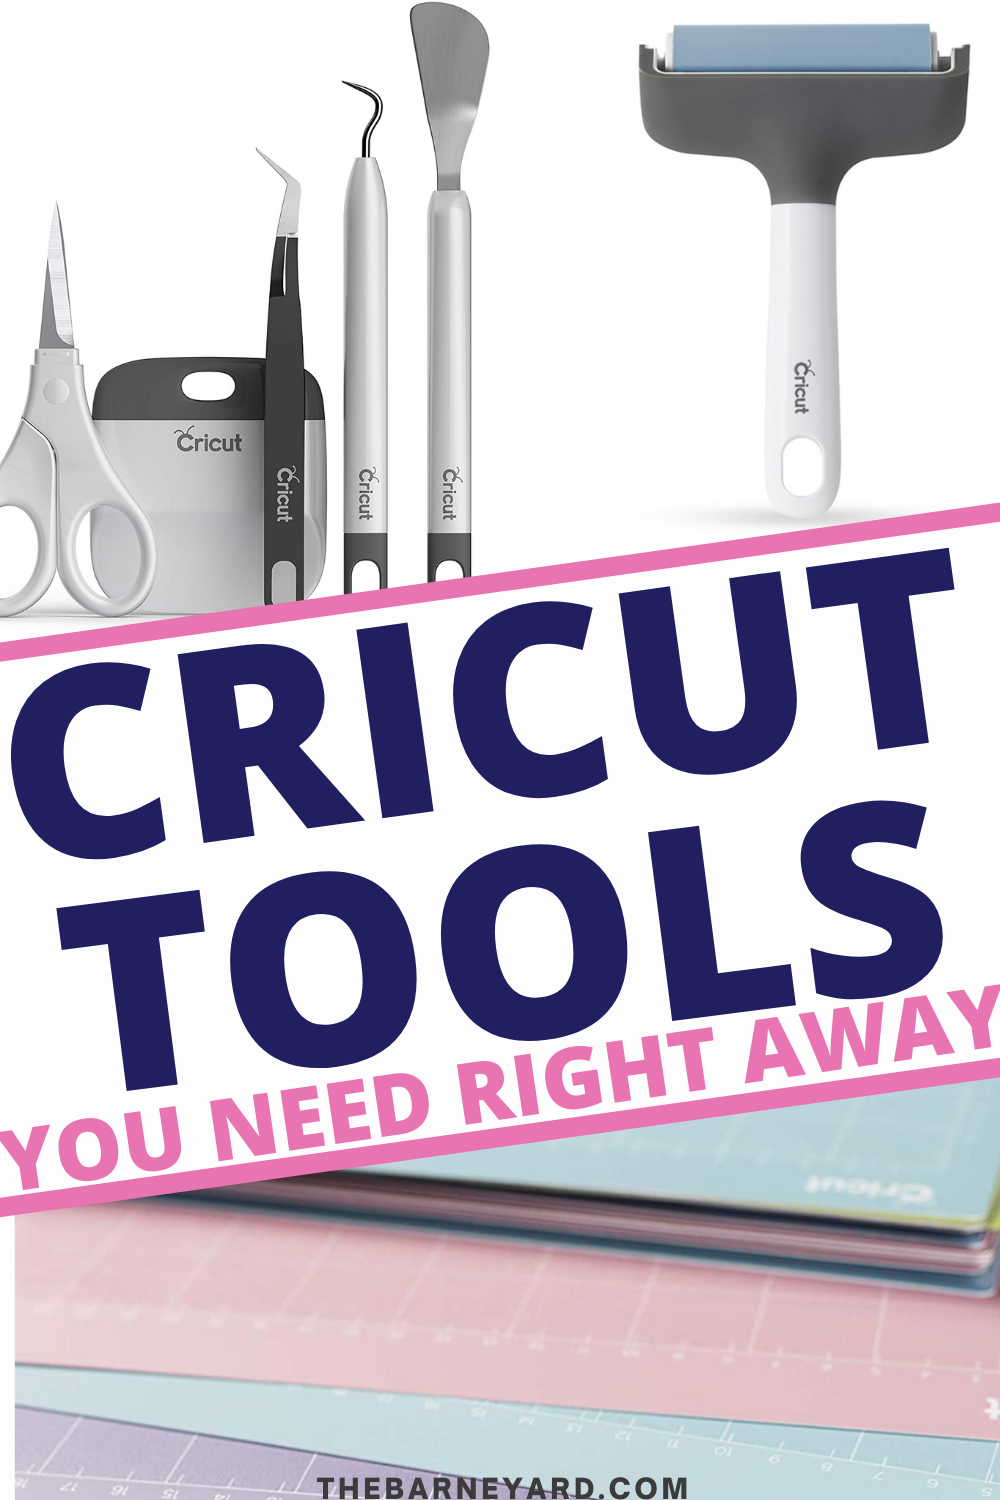 CRICUT TOOLS AND ACCESSORIES NEEDED TO USE A CRICUT - Sugarcoated